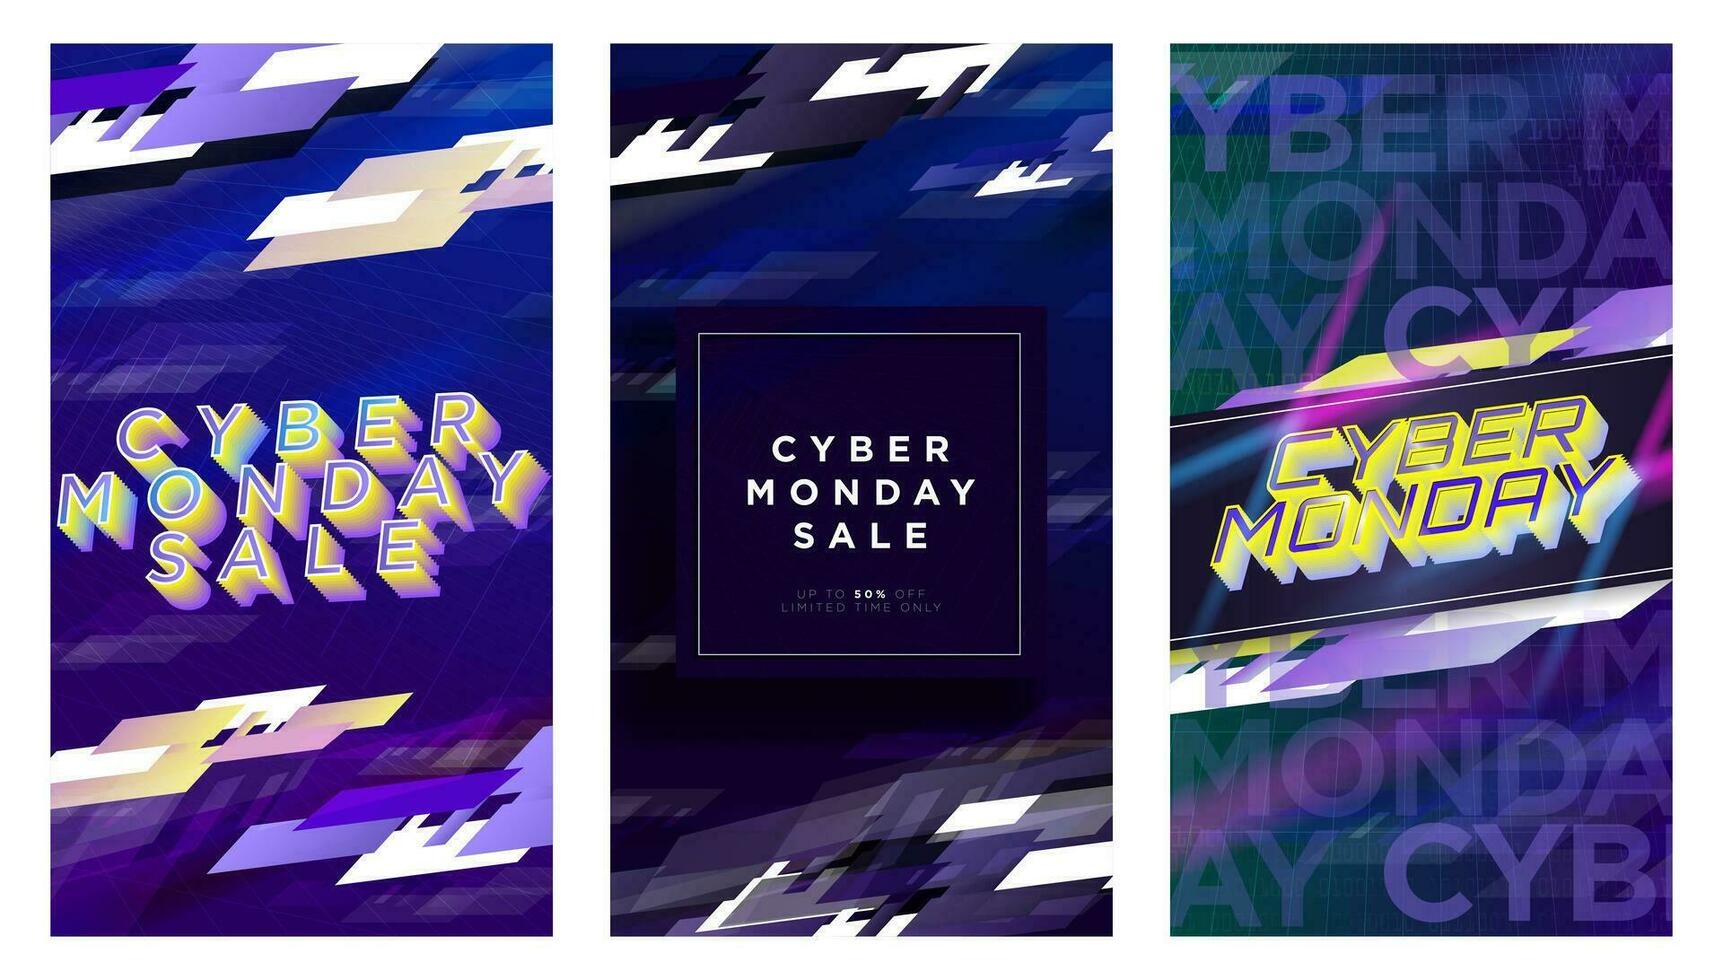 Set of Cyber Monday Sale Social Media Story Templates and designs. Digital Concept Backgrounds and Vertical Poster layouts for cyber monday sale. Vector Illustration. EPS 10.